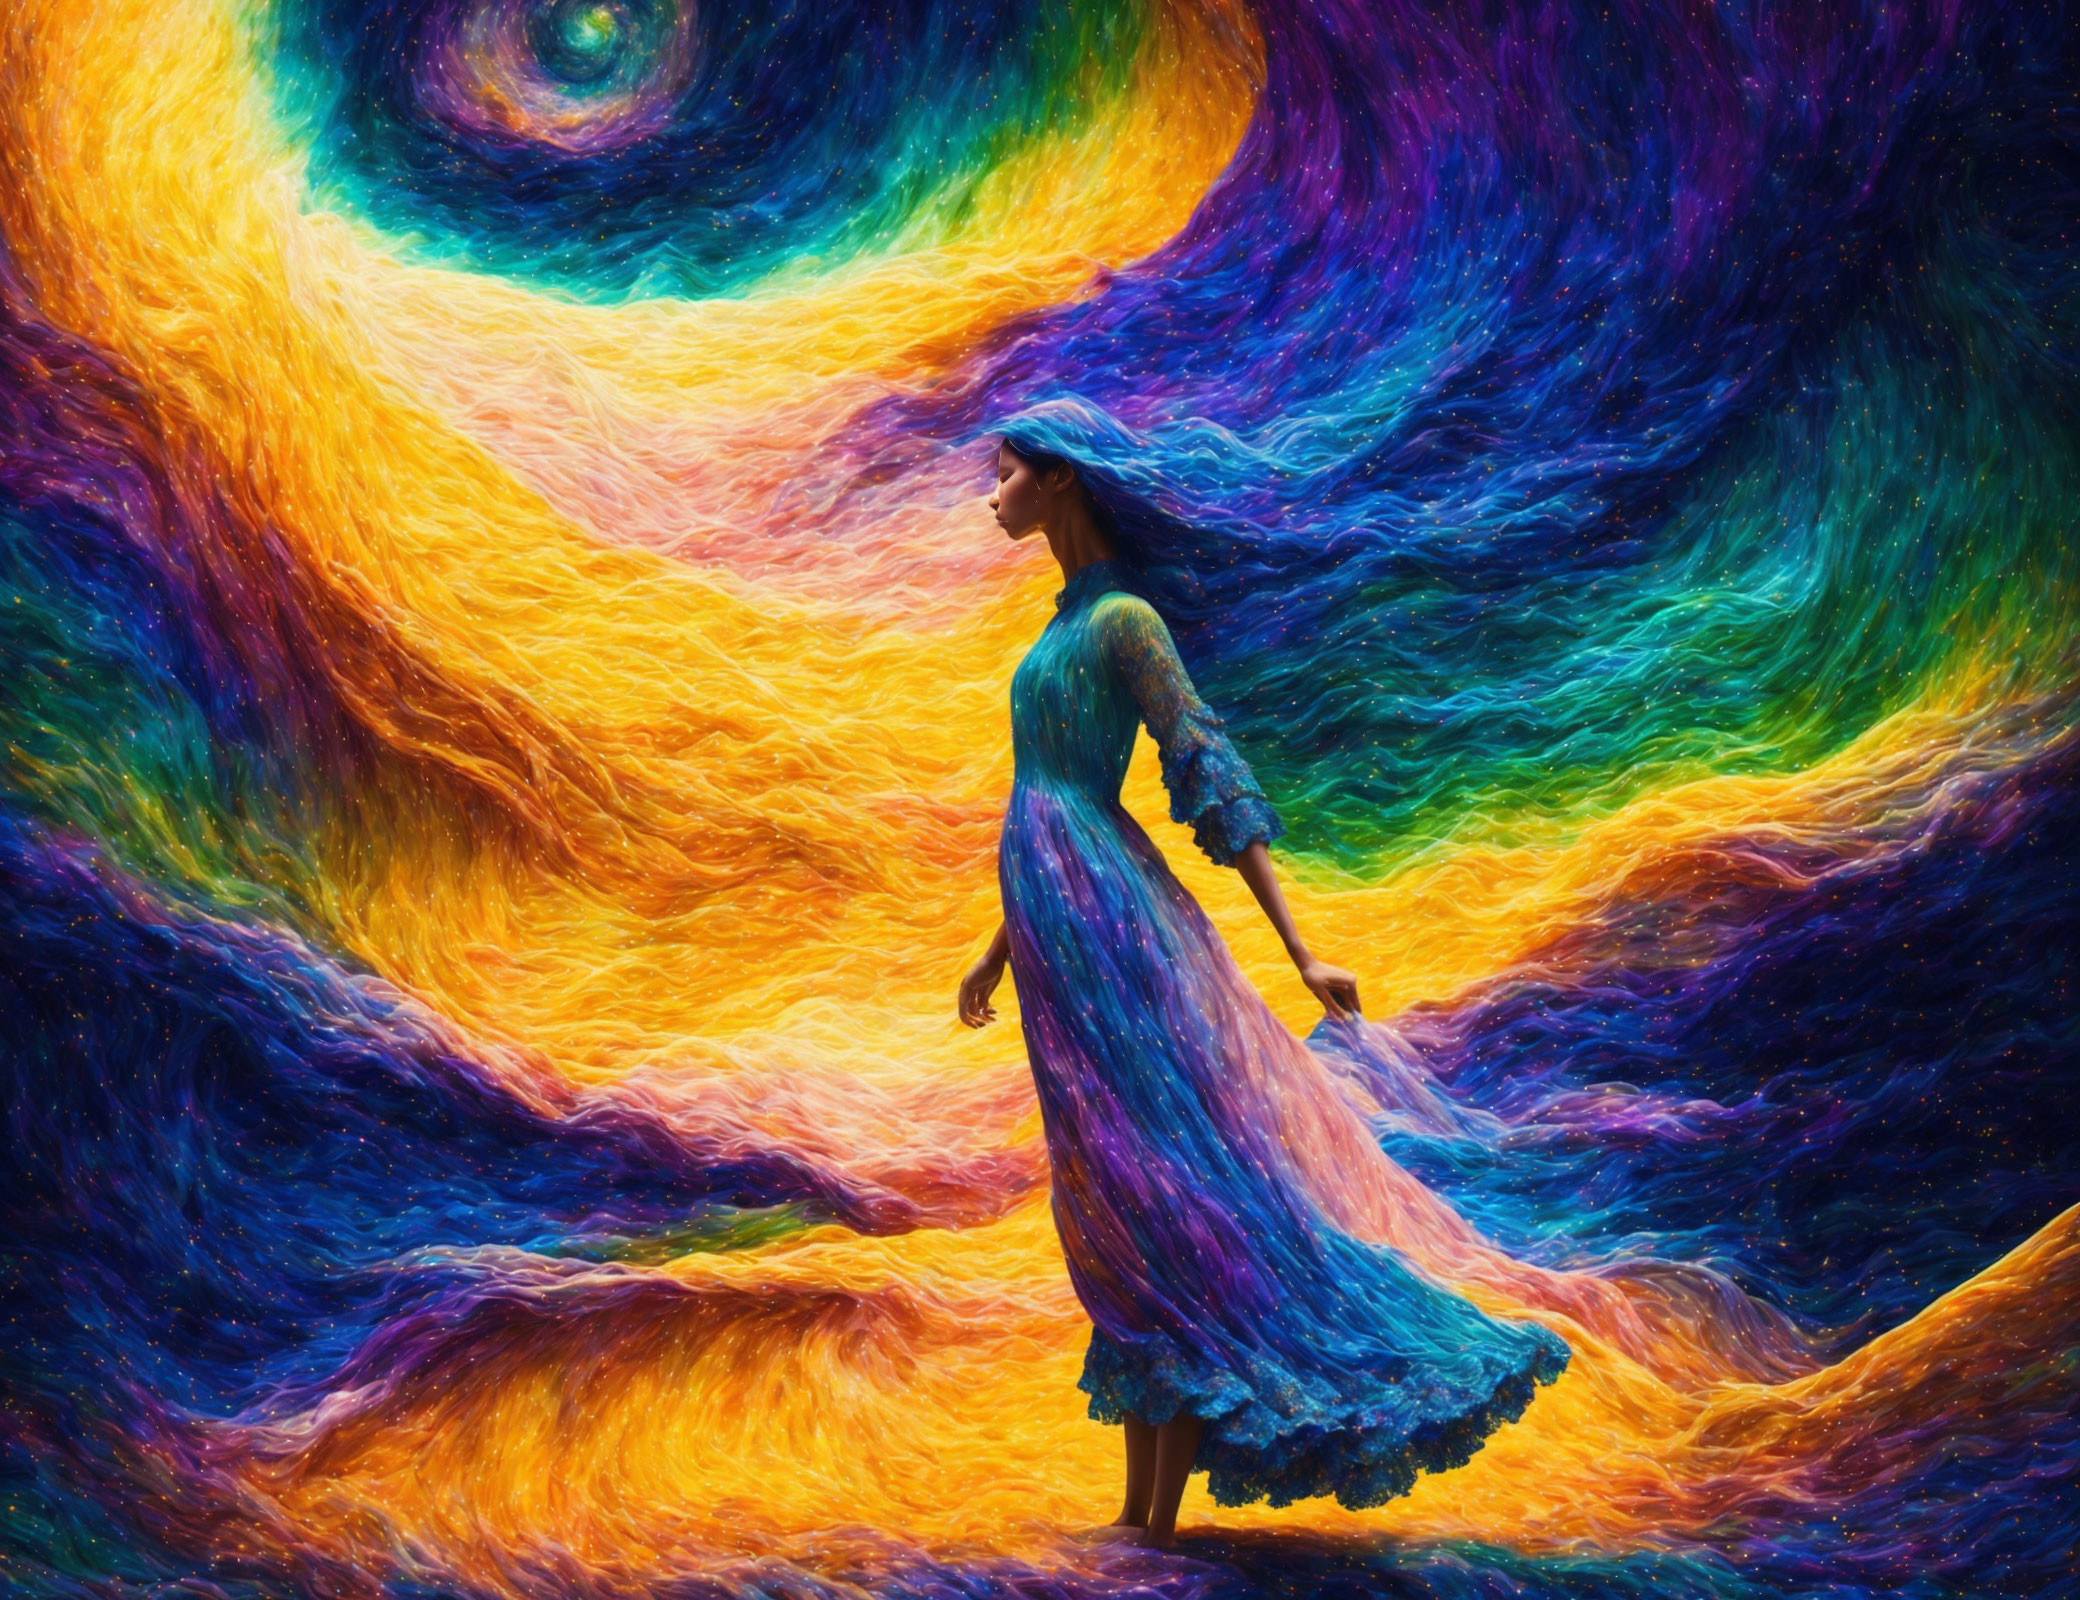 Woman in flowing dress against vibrant, swirling backdrop of intense colors.